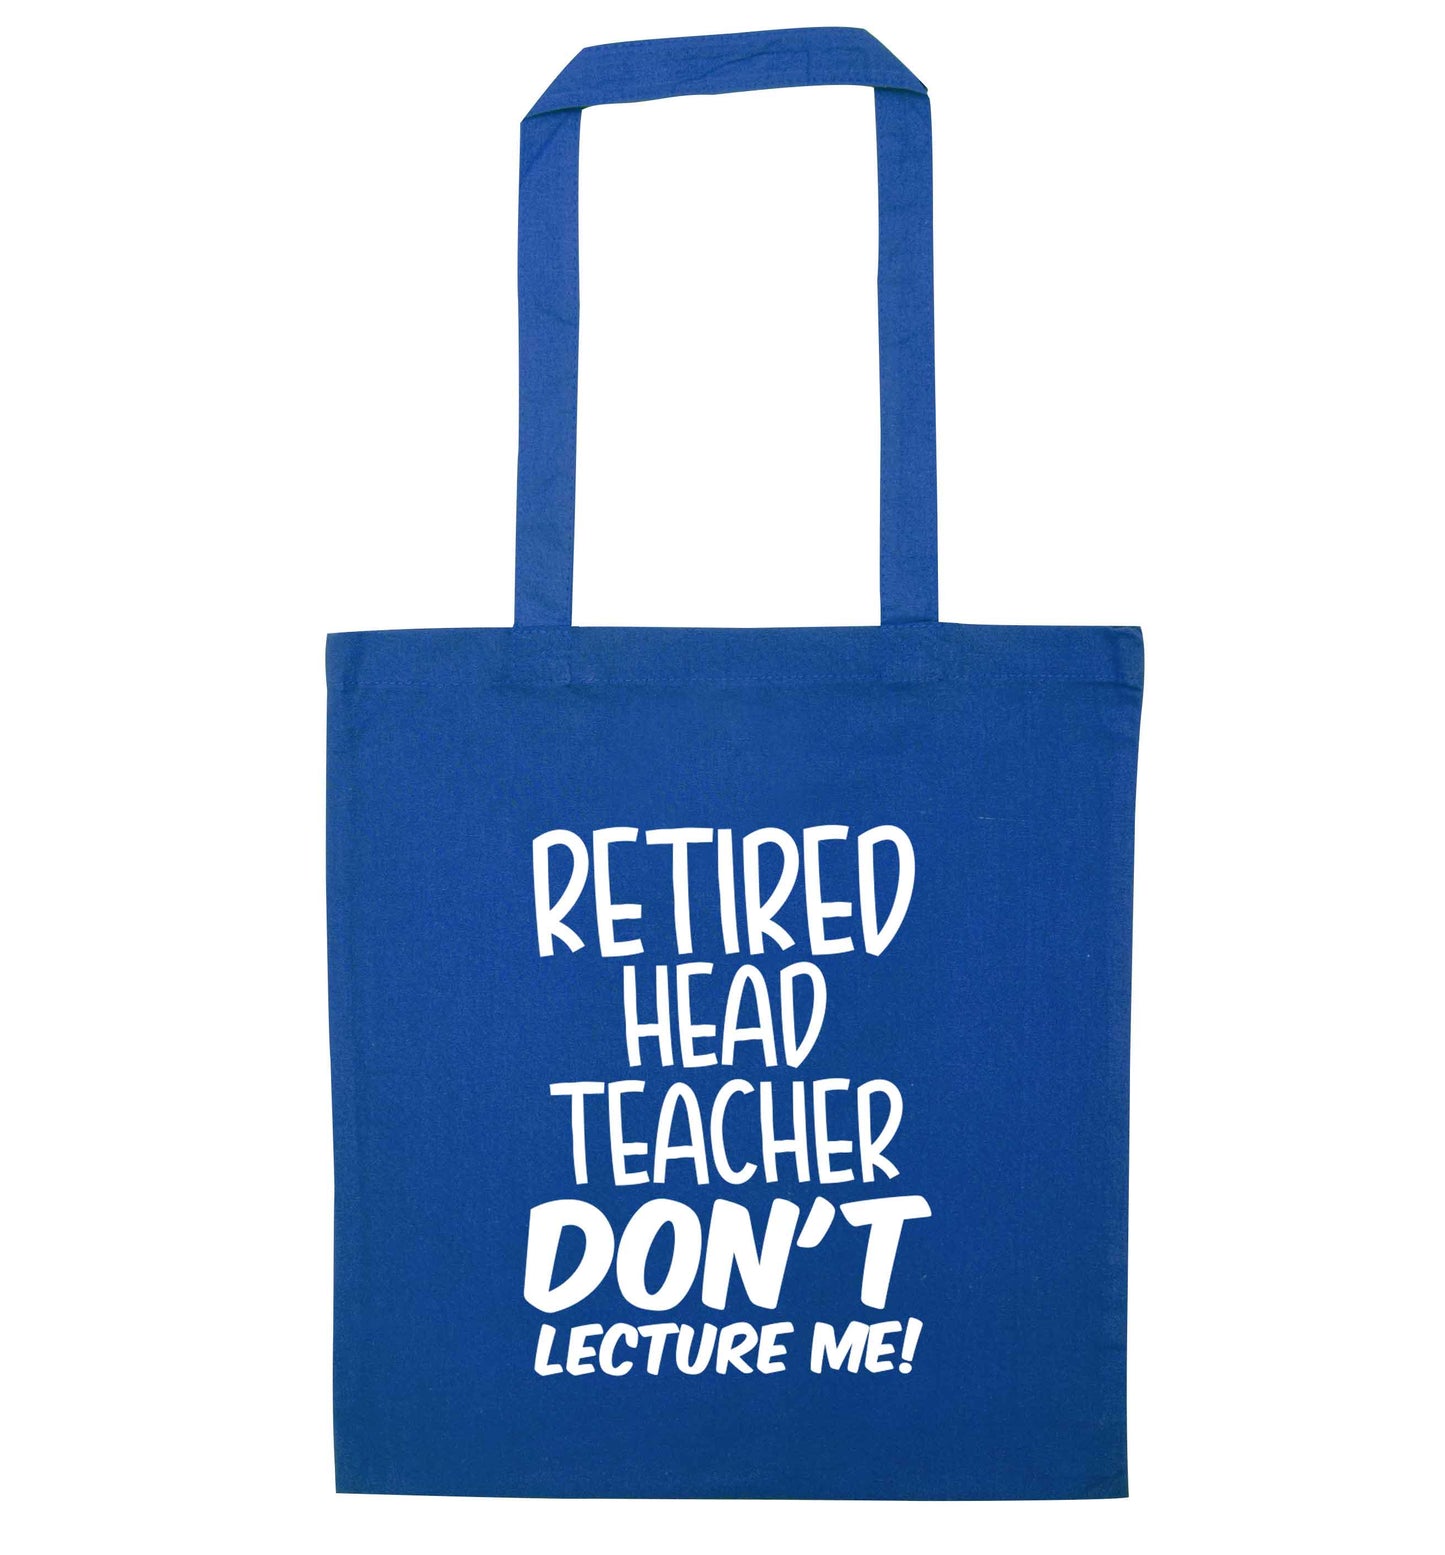 Retired head teacher don't lecture me! blue tote bag